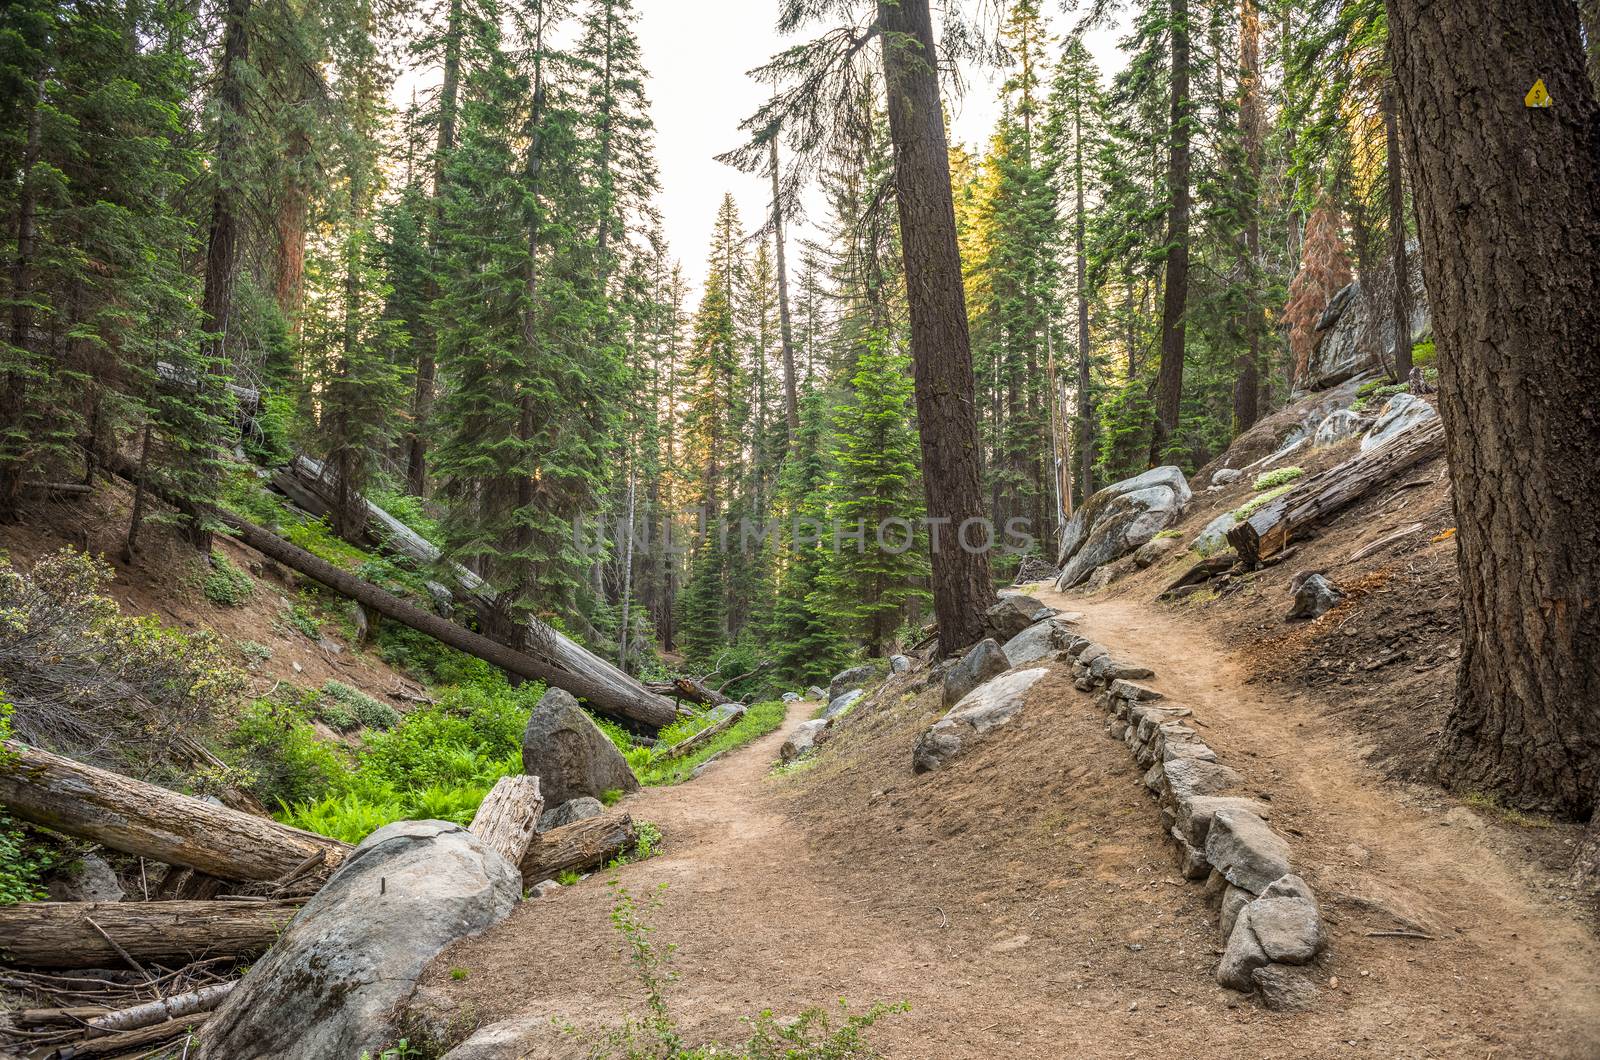 Sunset Rock trail in Sequoia National Park, California by Njean